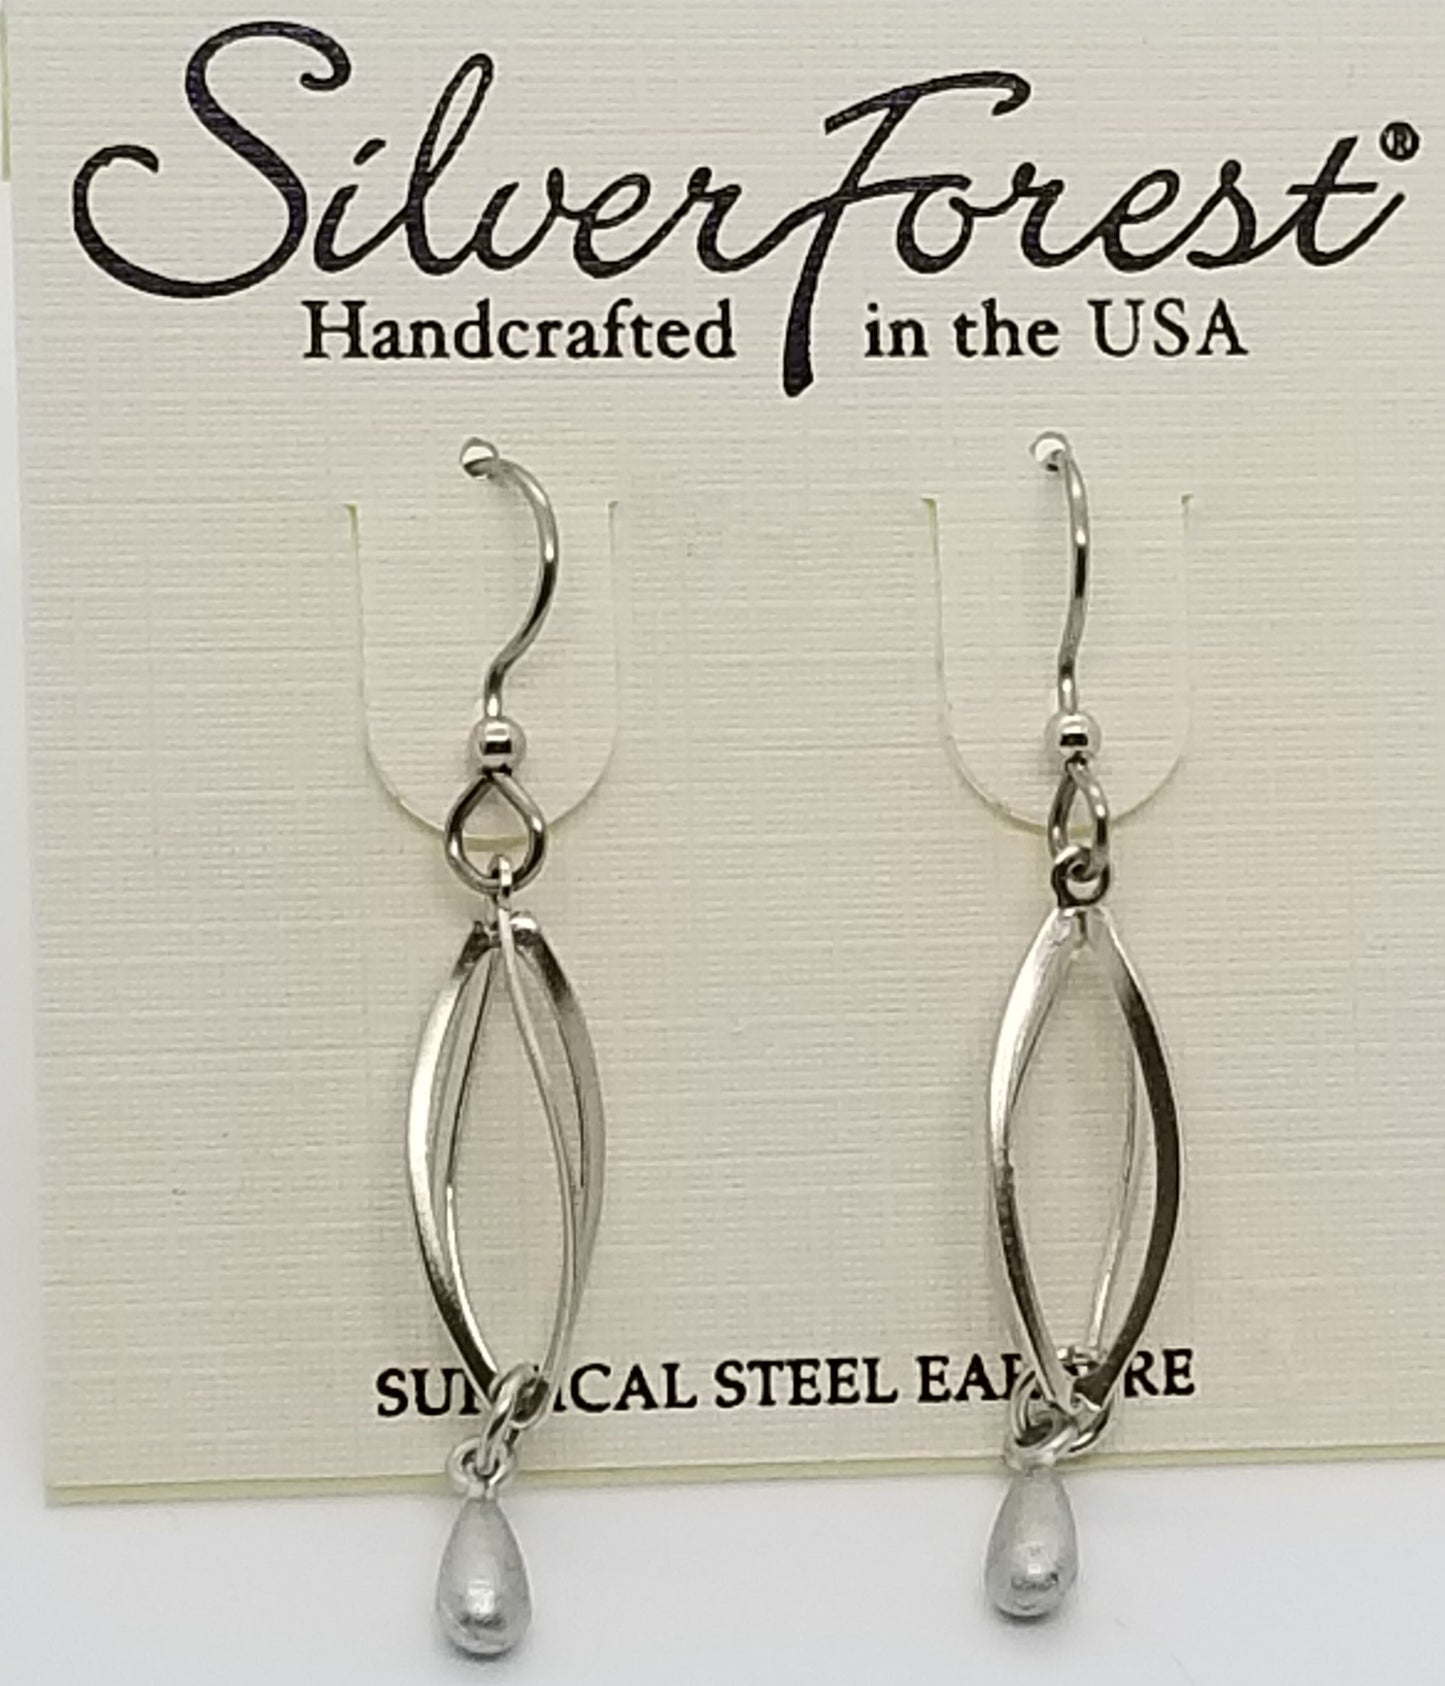 Silver forest surgical steel earrings